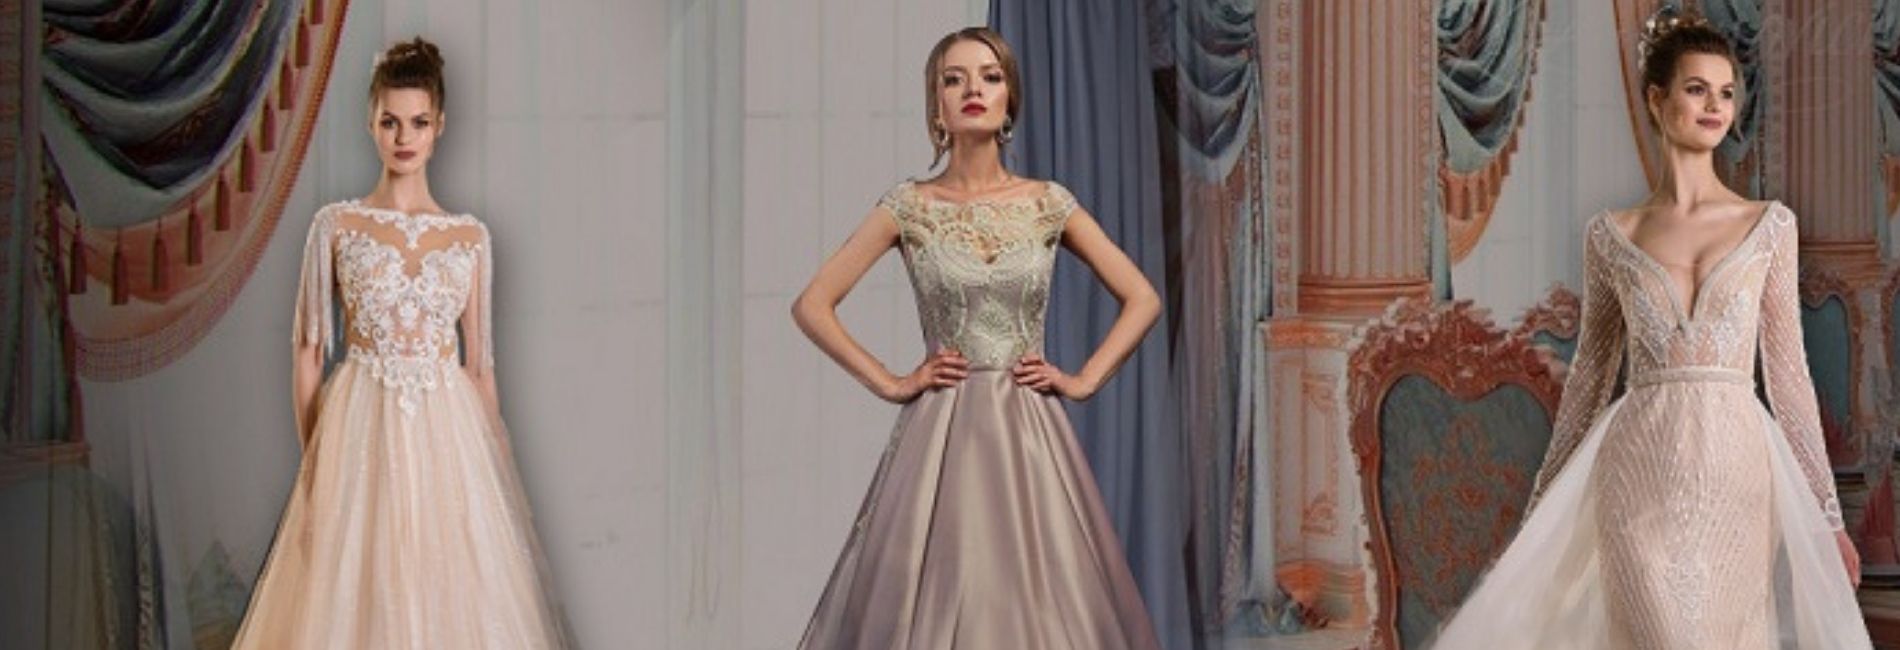 BRIDAL WEDDING GOWNS AND THEIR NEVER-ENDING DESIGNING INNOVATIONS